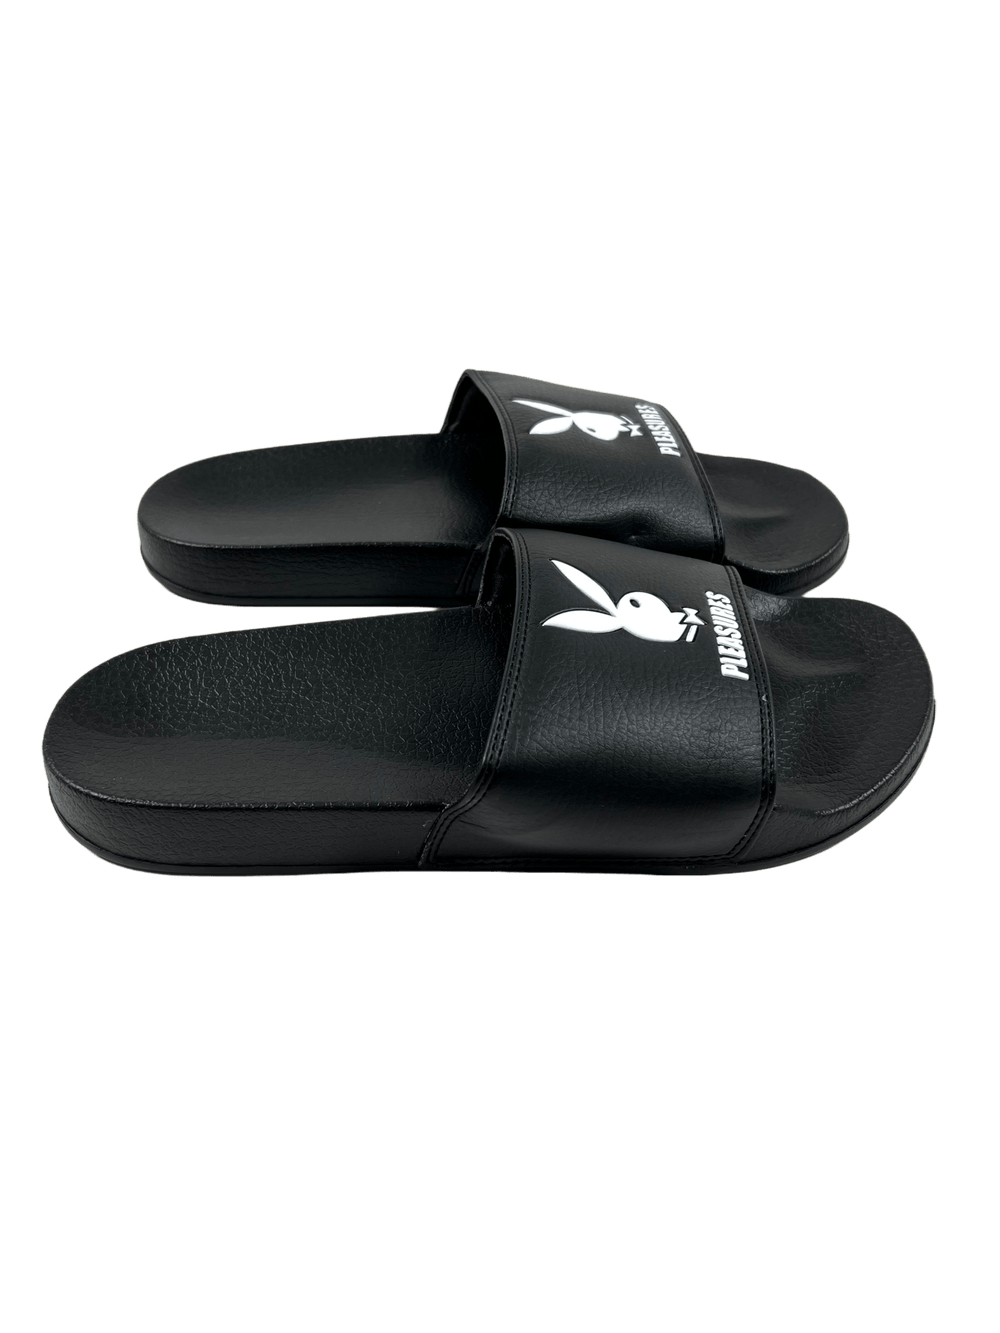 A pair of black PLEASURES PLAYBOY slides with a white logo.